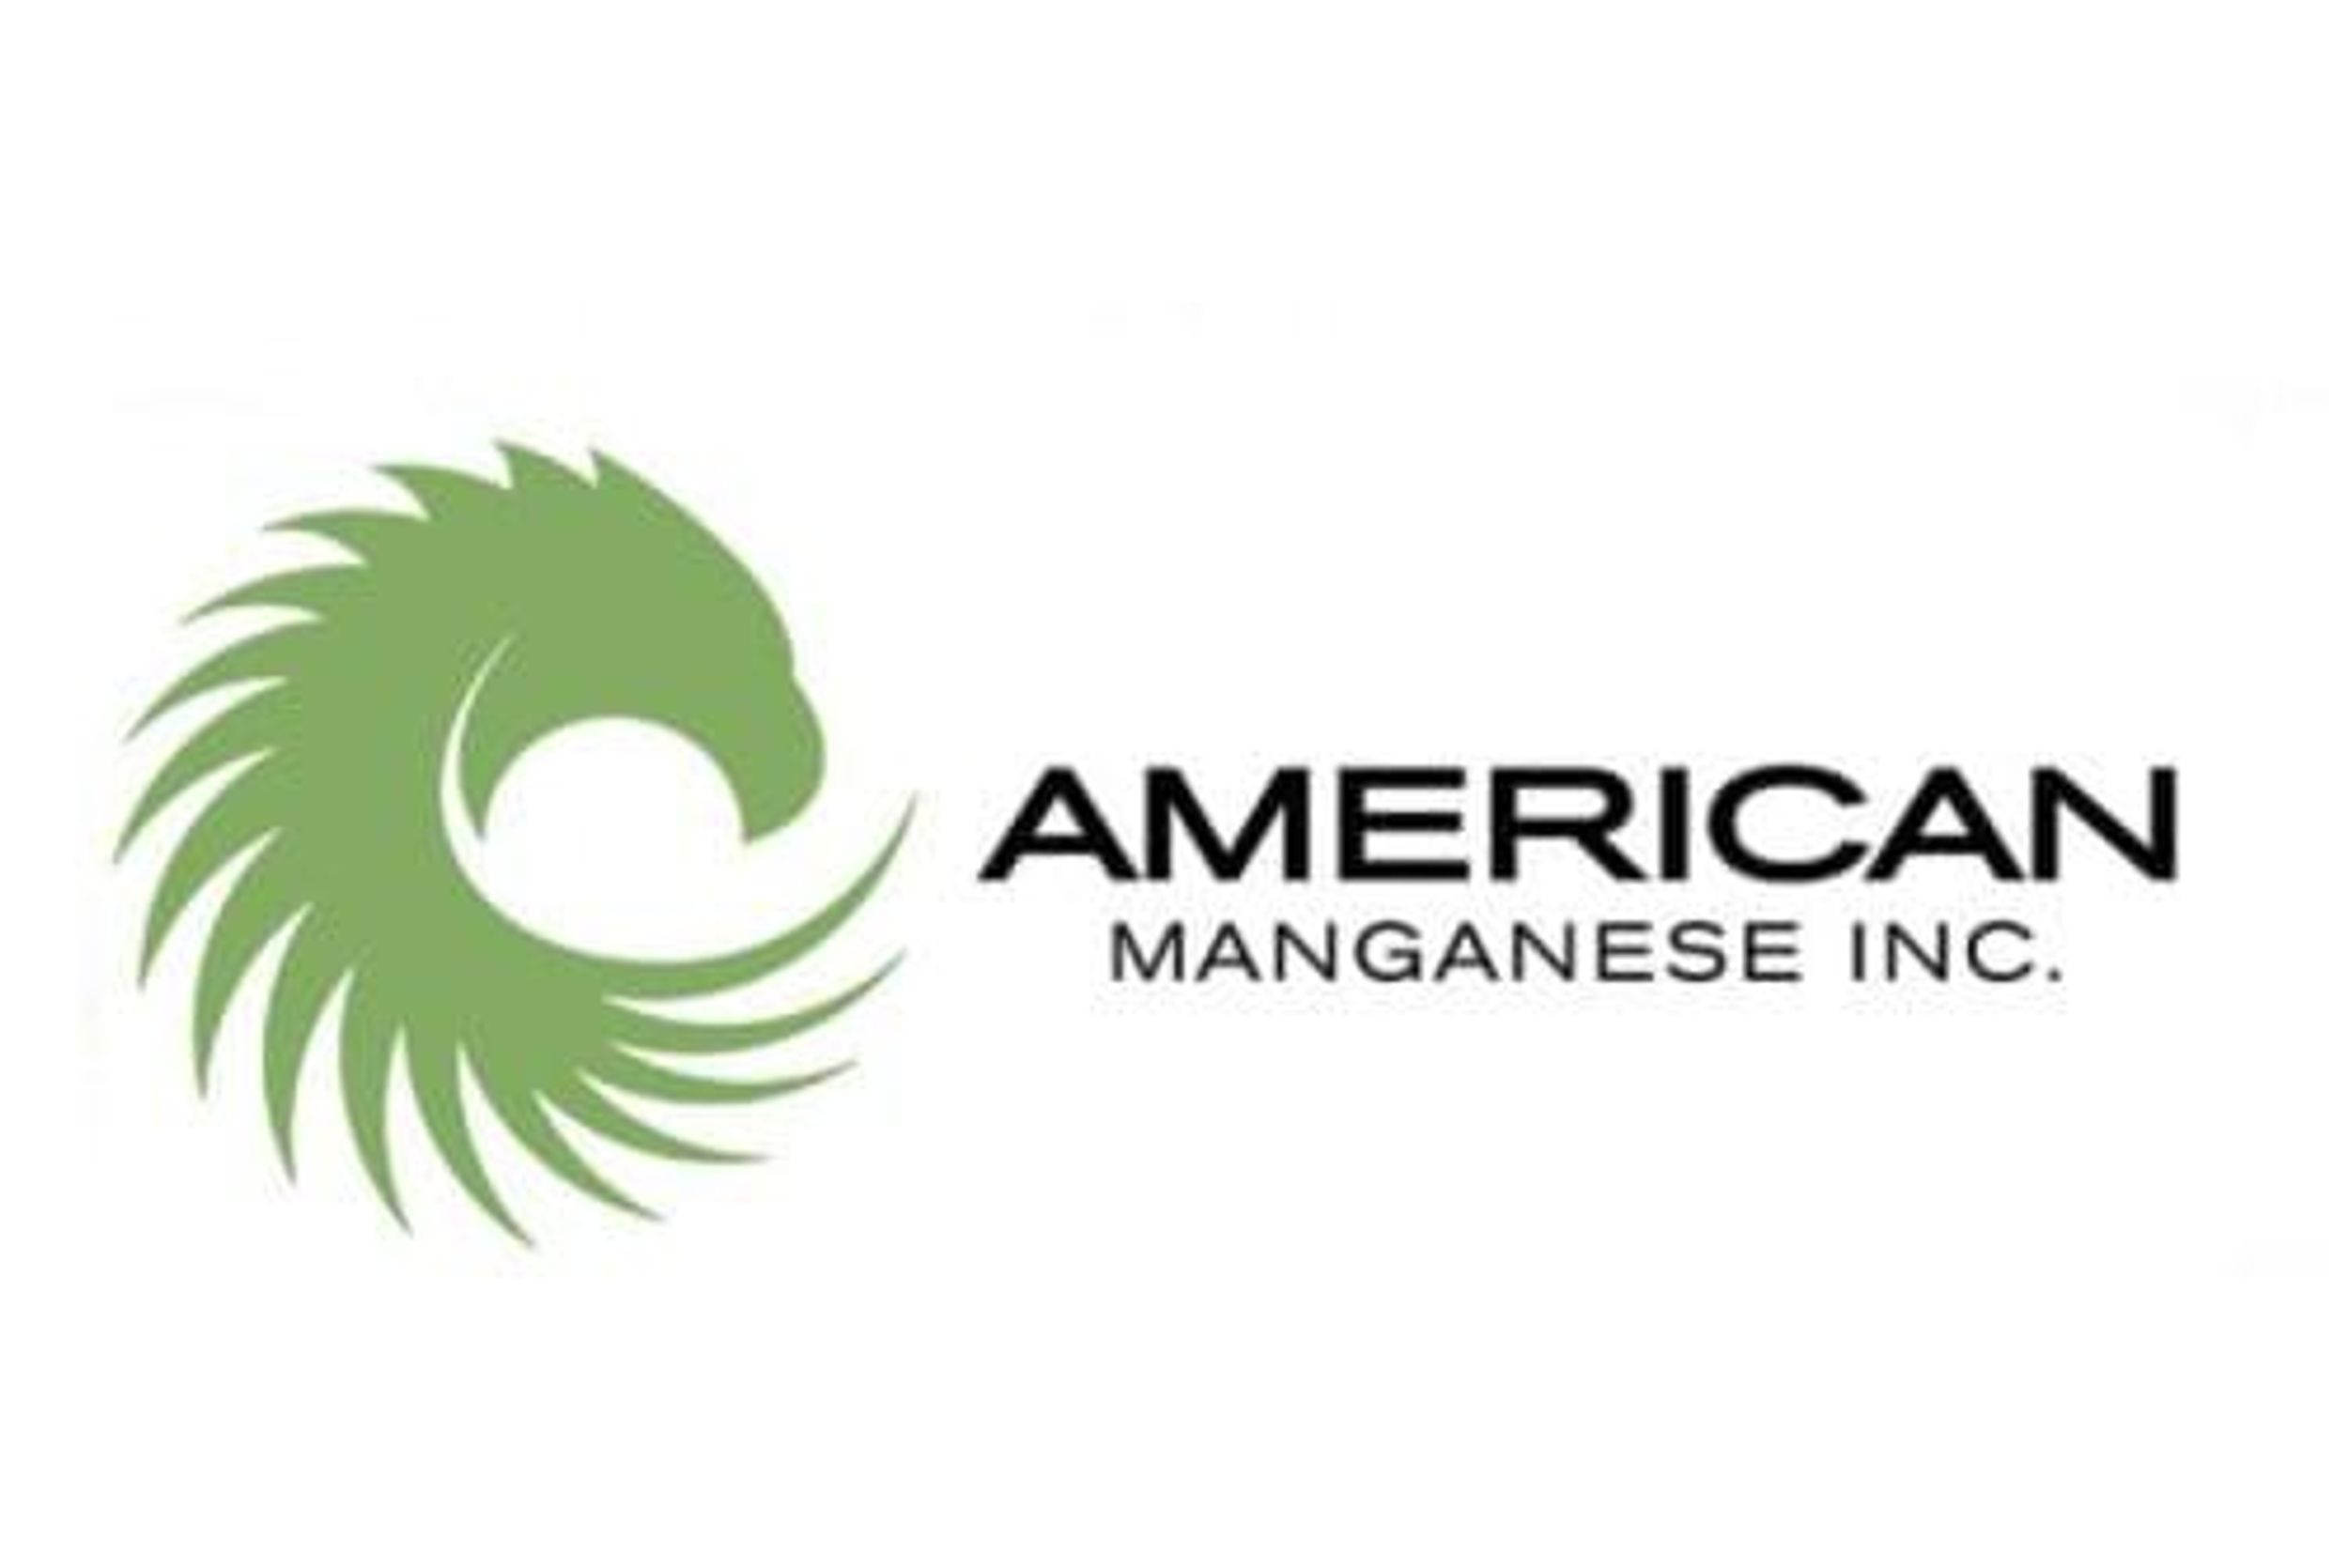 American Manganese Selects Minviro to Conduct a Life Cycle Assessment of the RecycLiCo Battery Recycling-Upcycling Process